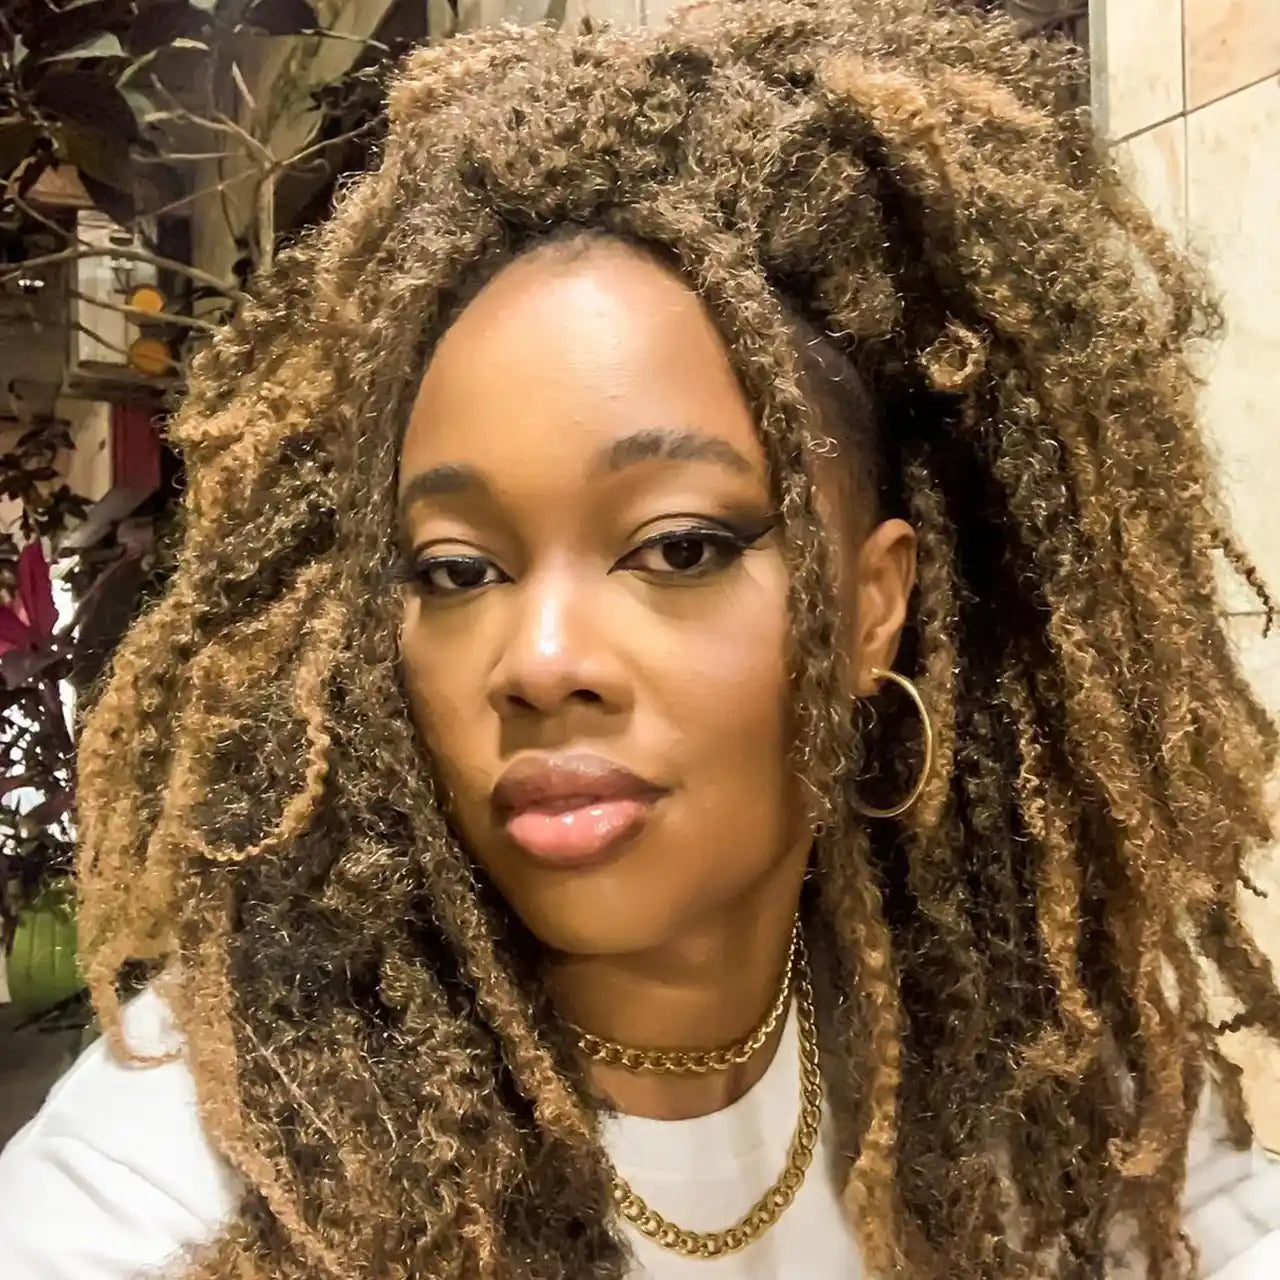  A woman with Marley hair styled in highlighted dreadlocks, wearing gold hoop earrings, a white top, and layered gold necklaces, gazing at the camera with a soft smile.